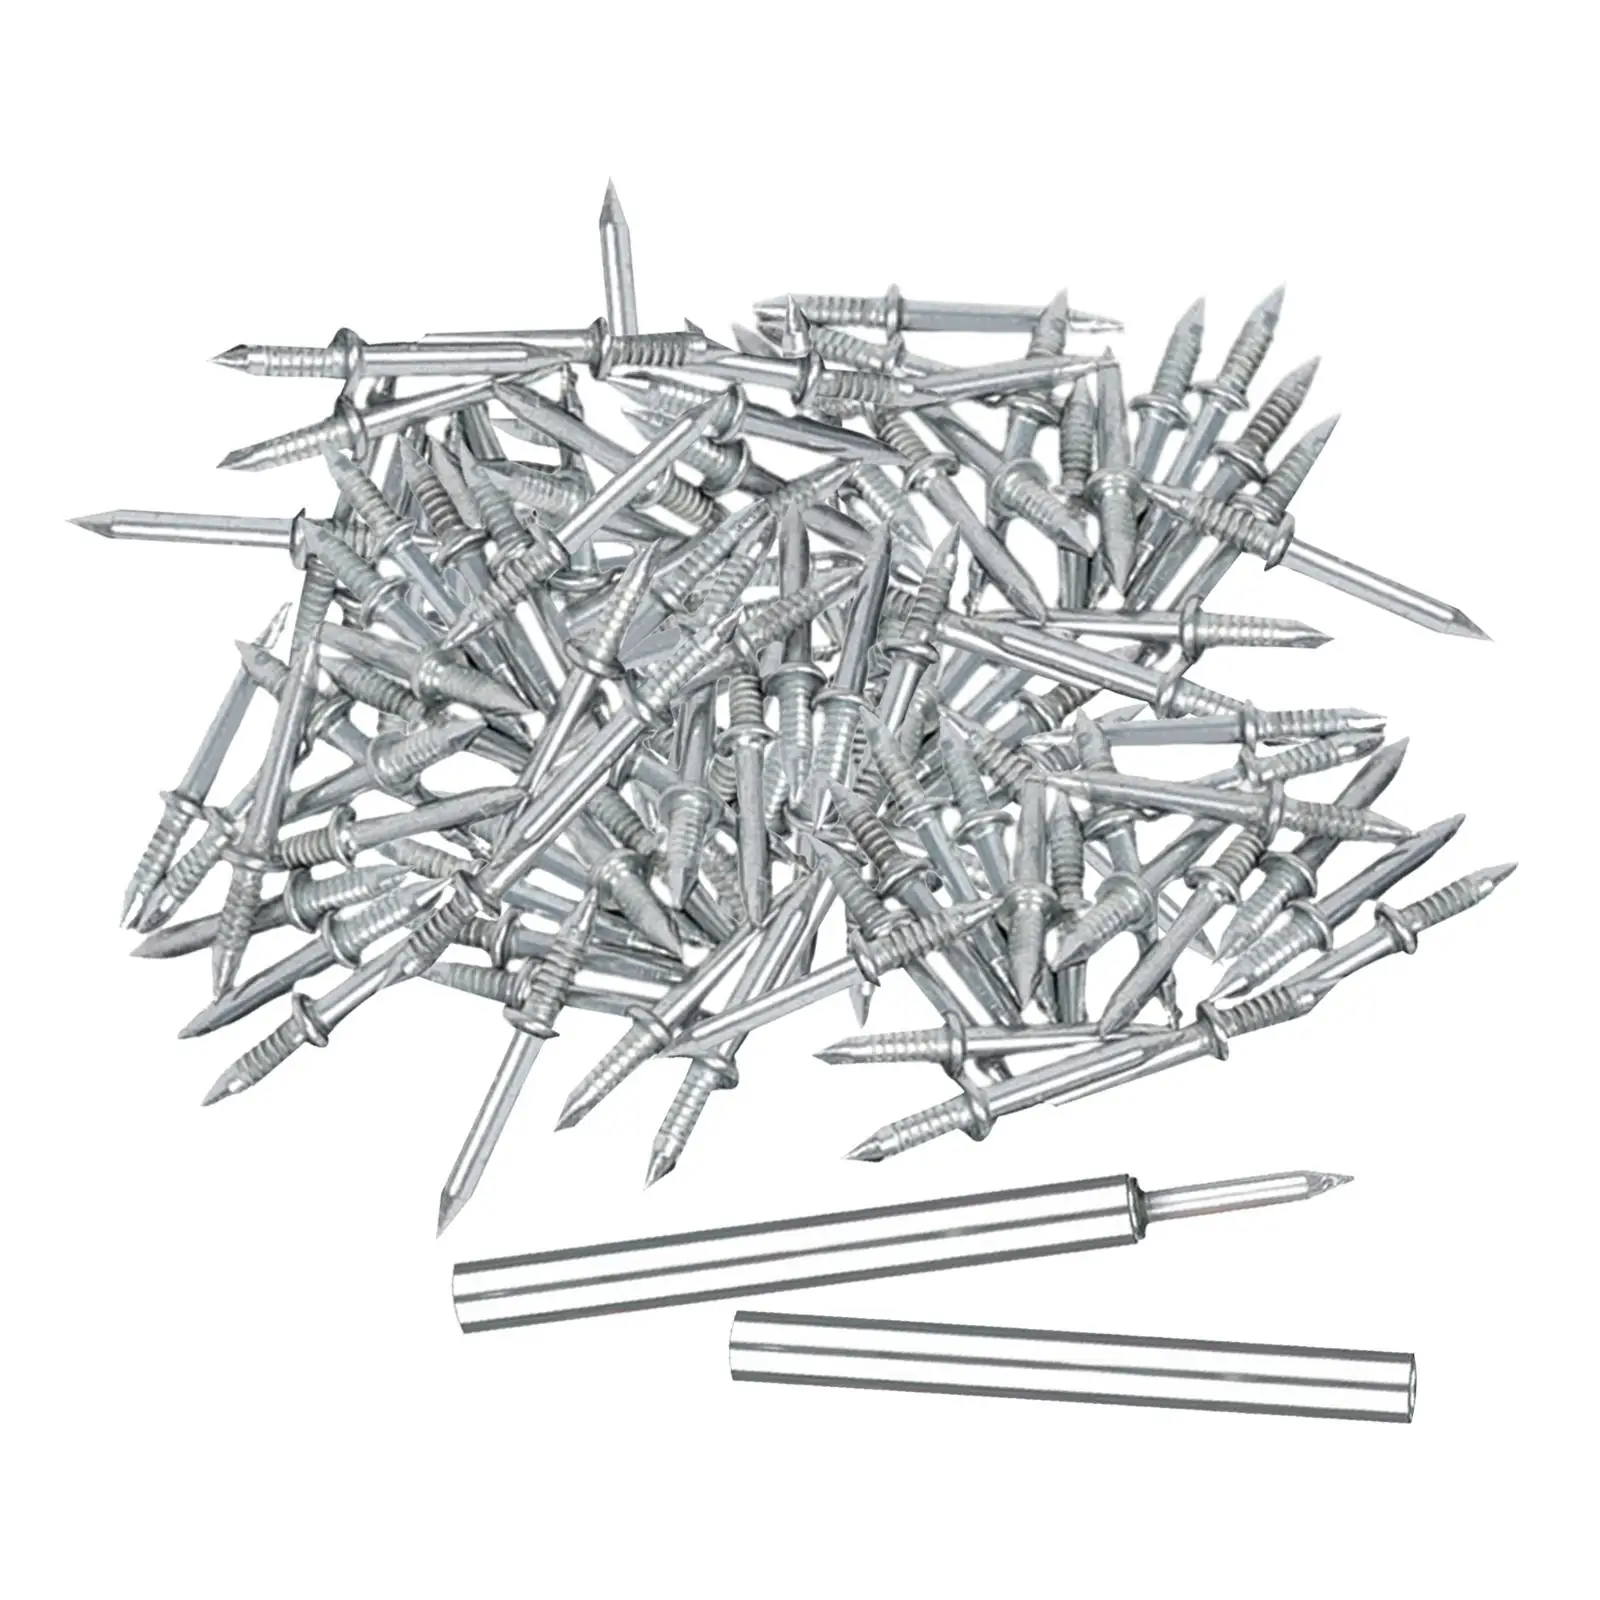 300x Double Headed Nails Headboards DIY Craft Improvement Joinery Nails